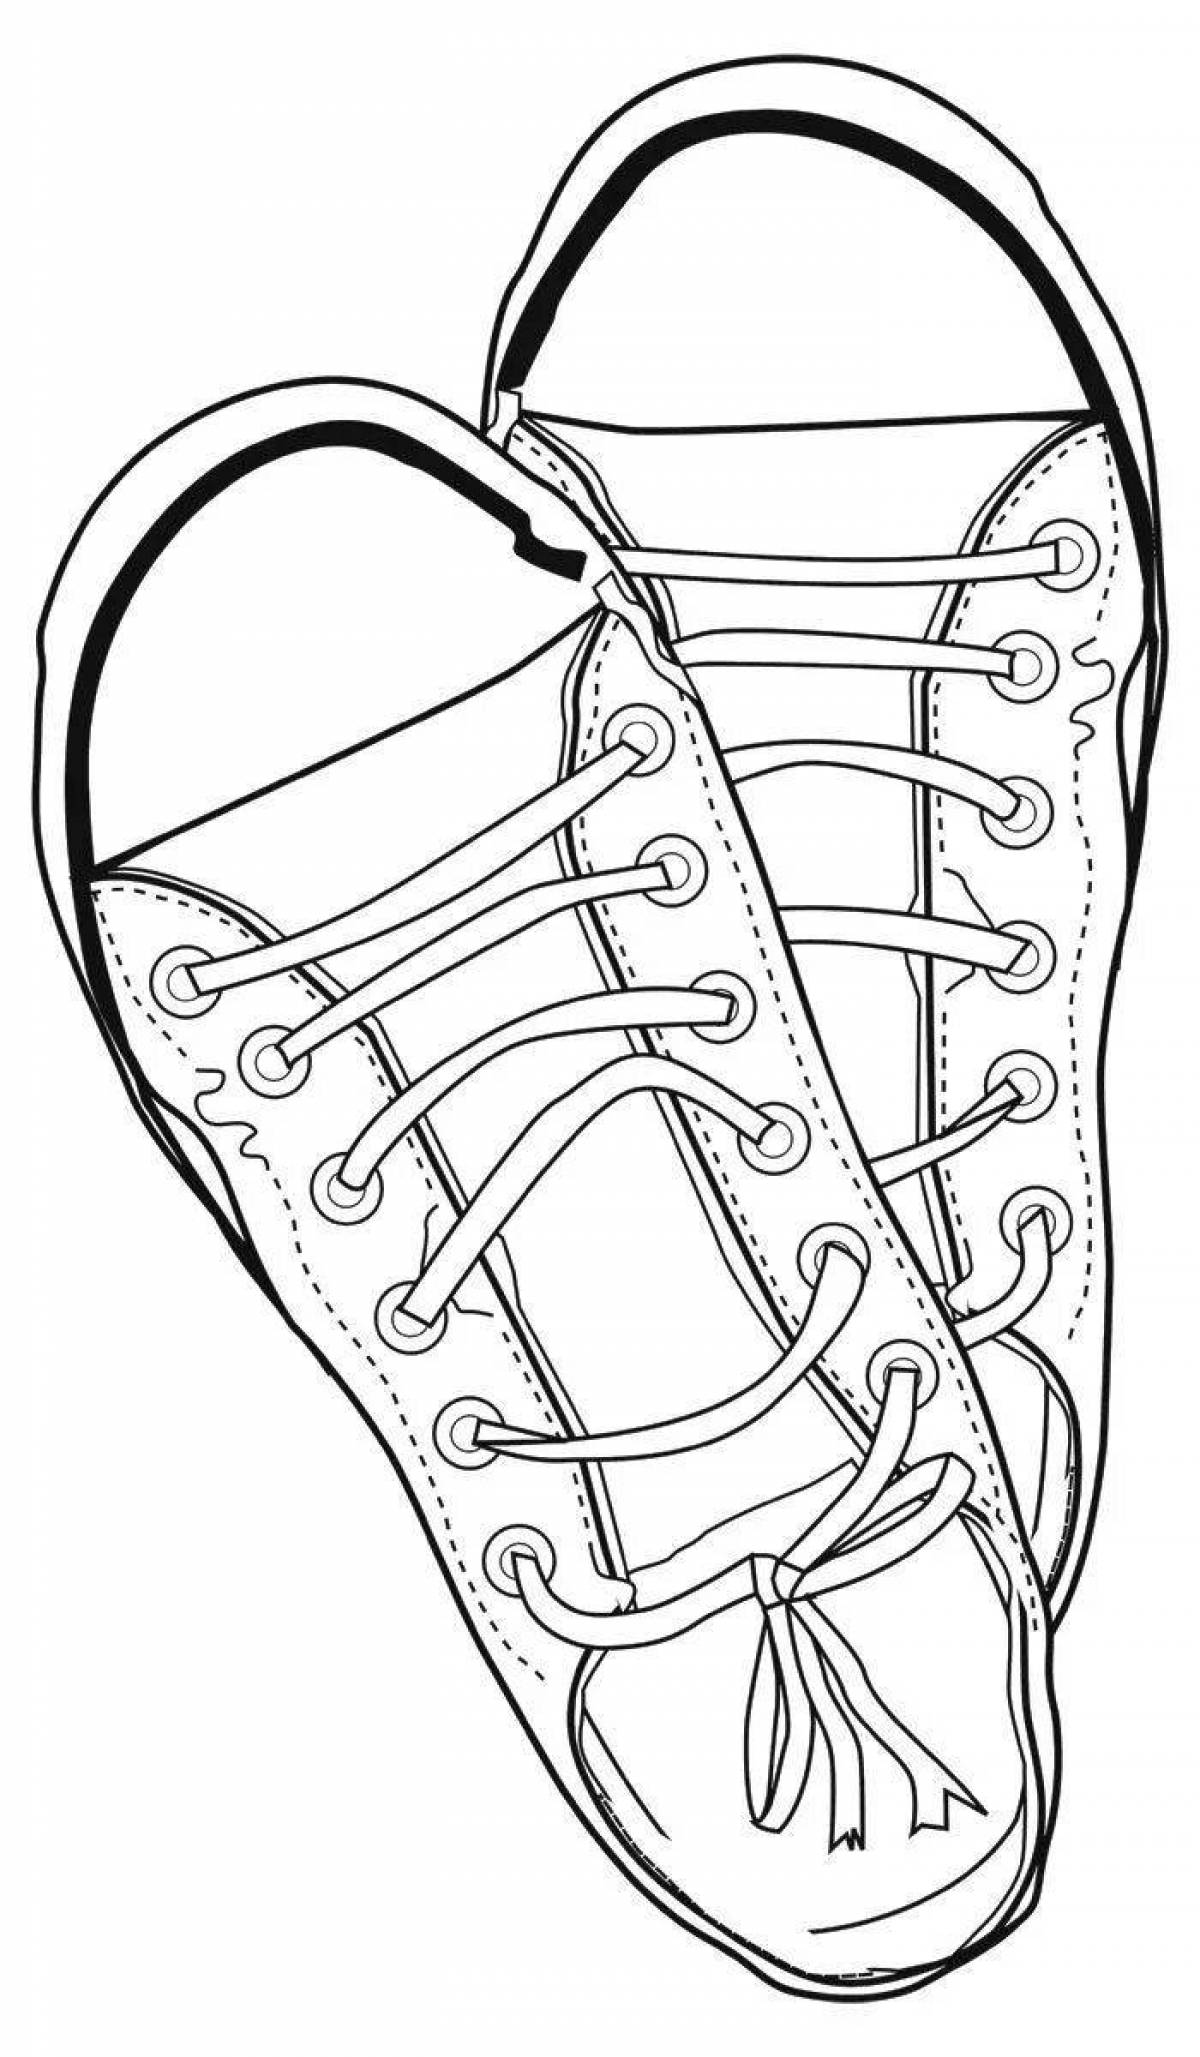 Fun coloring pages of sneakers